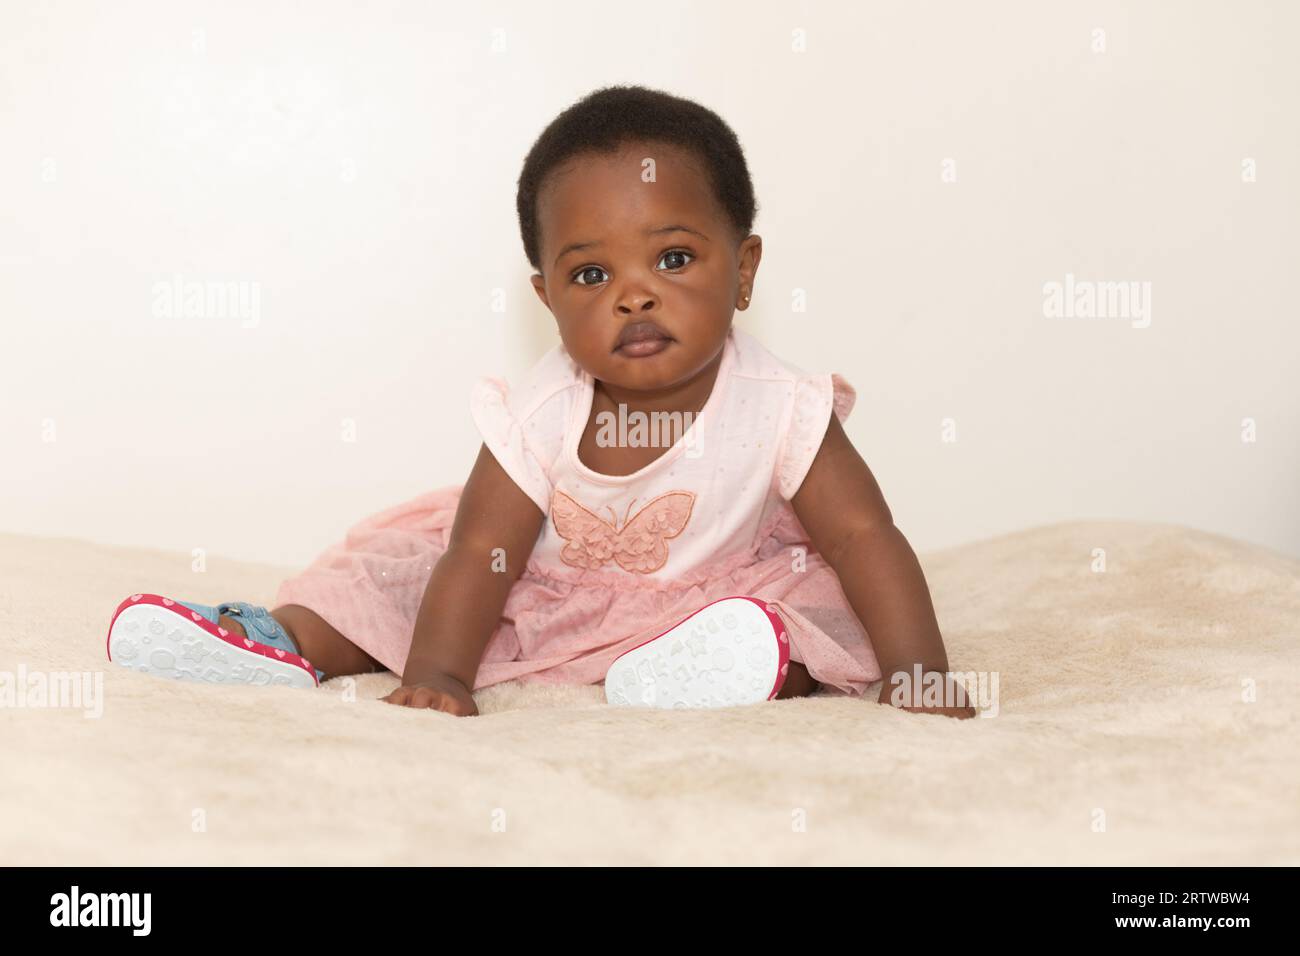 Portrait of a black baby girl dressed in a pink dress sitting on a bed Stock Photo